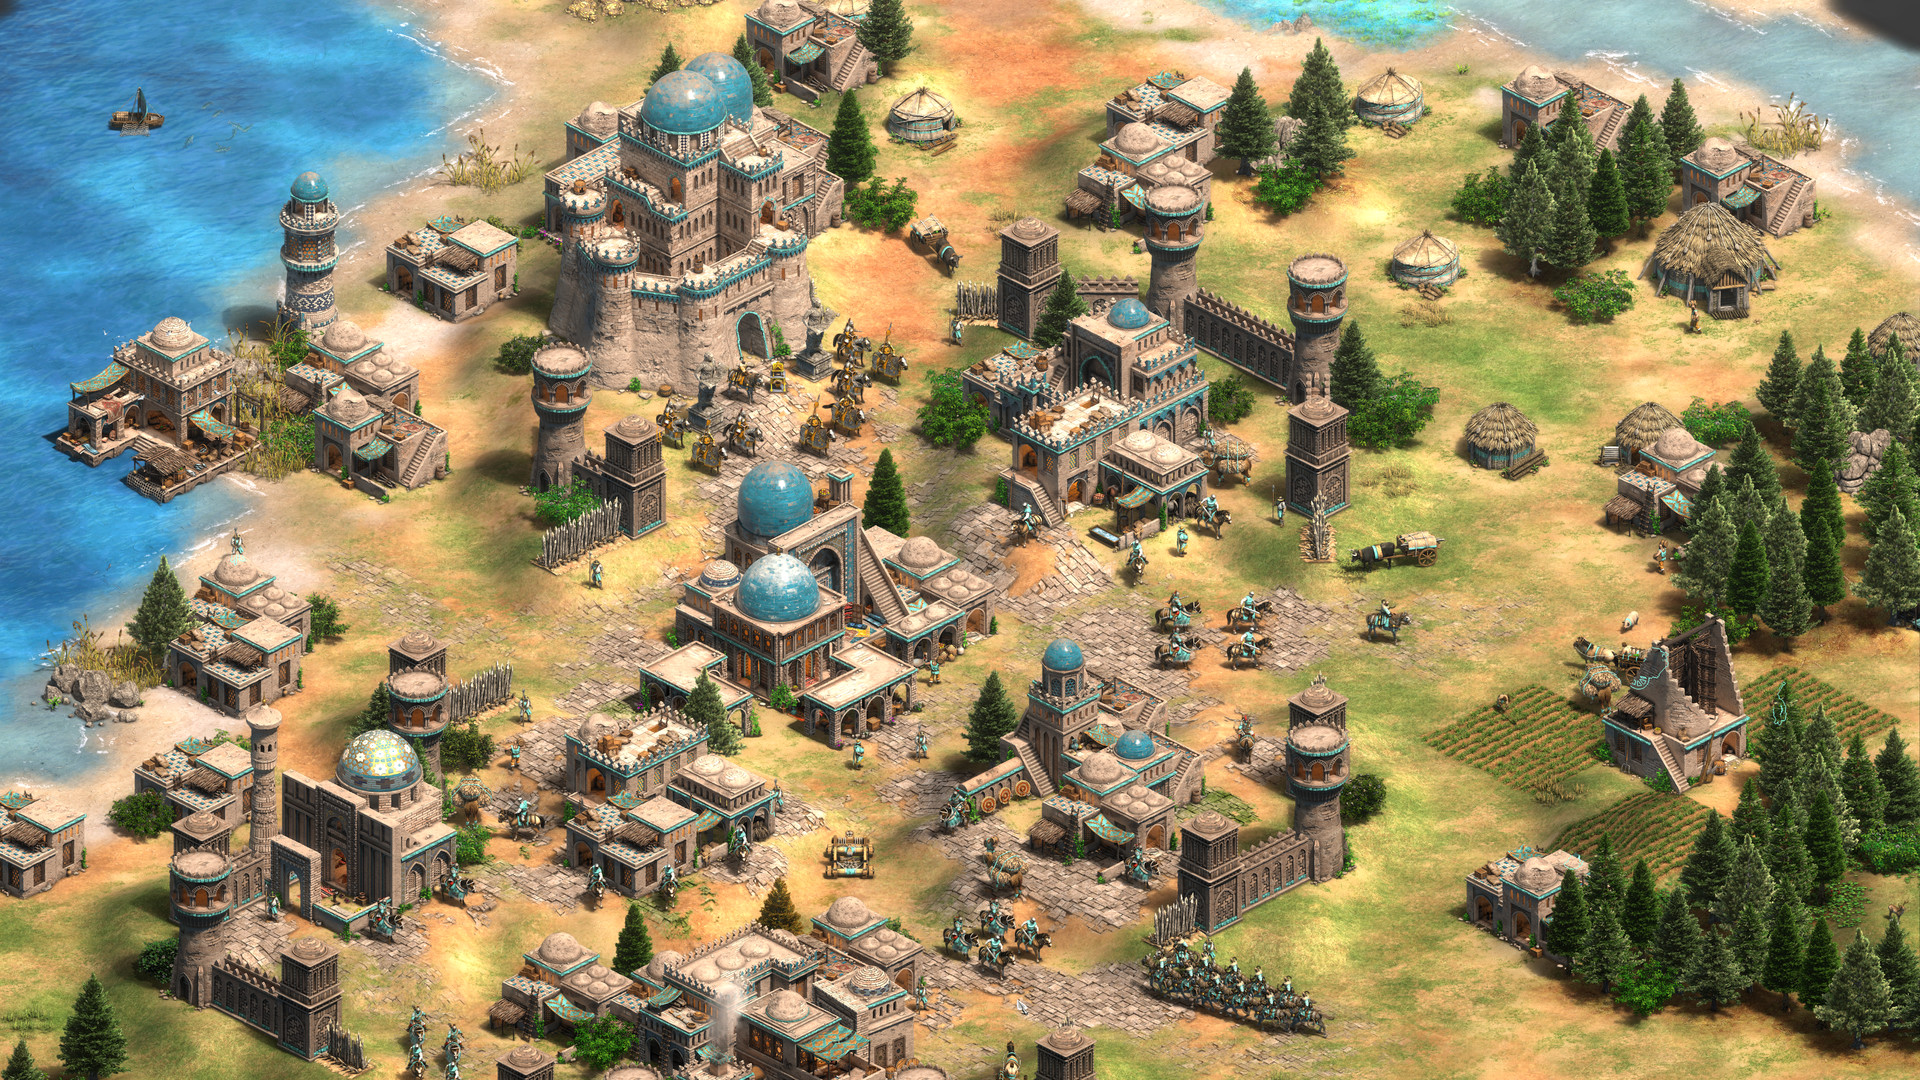 Age of empires 2 : definitive edition